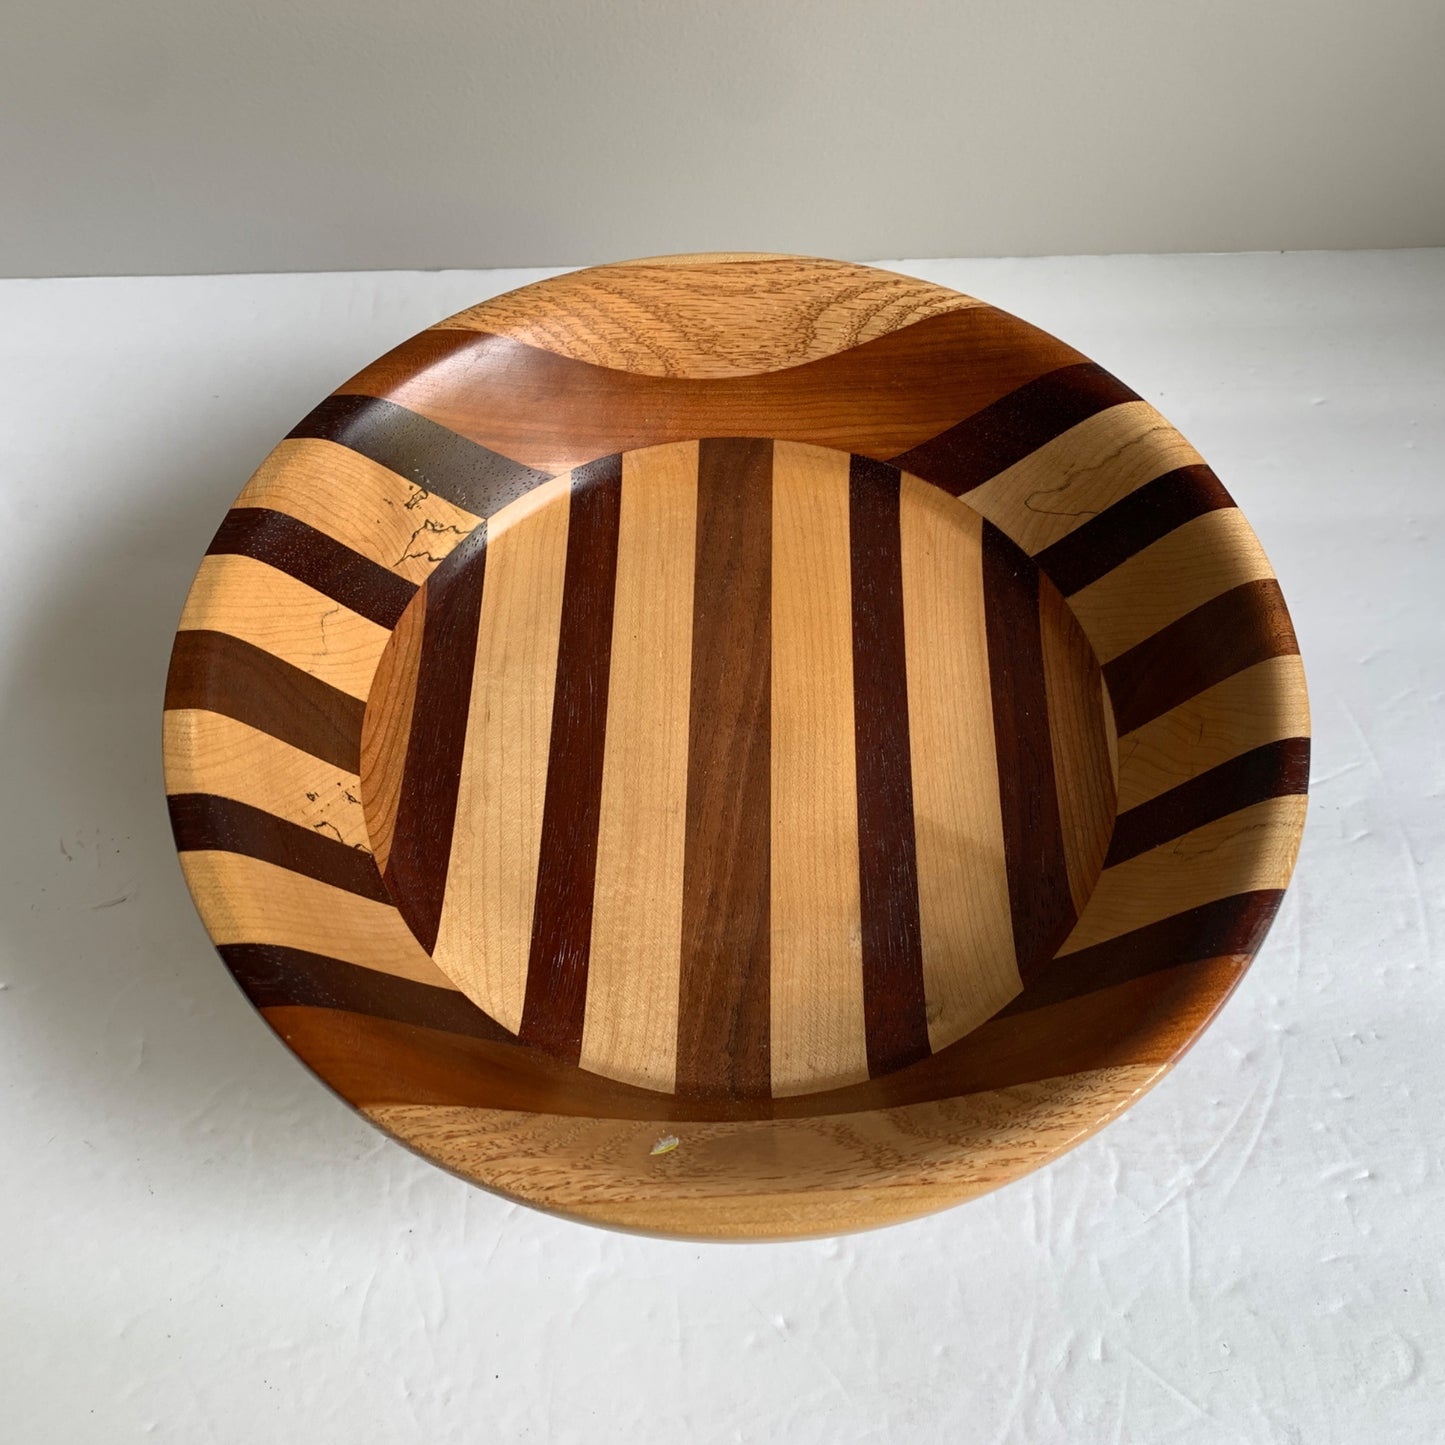 Jay Young Handcrafted Handmade Turned Wood Pedestal Bowl